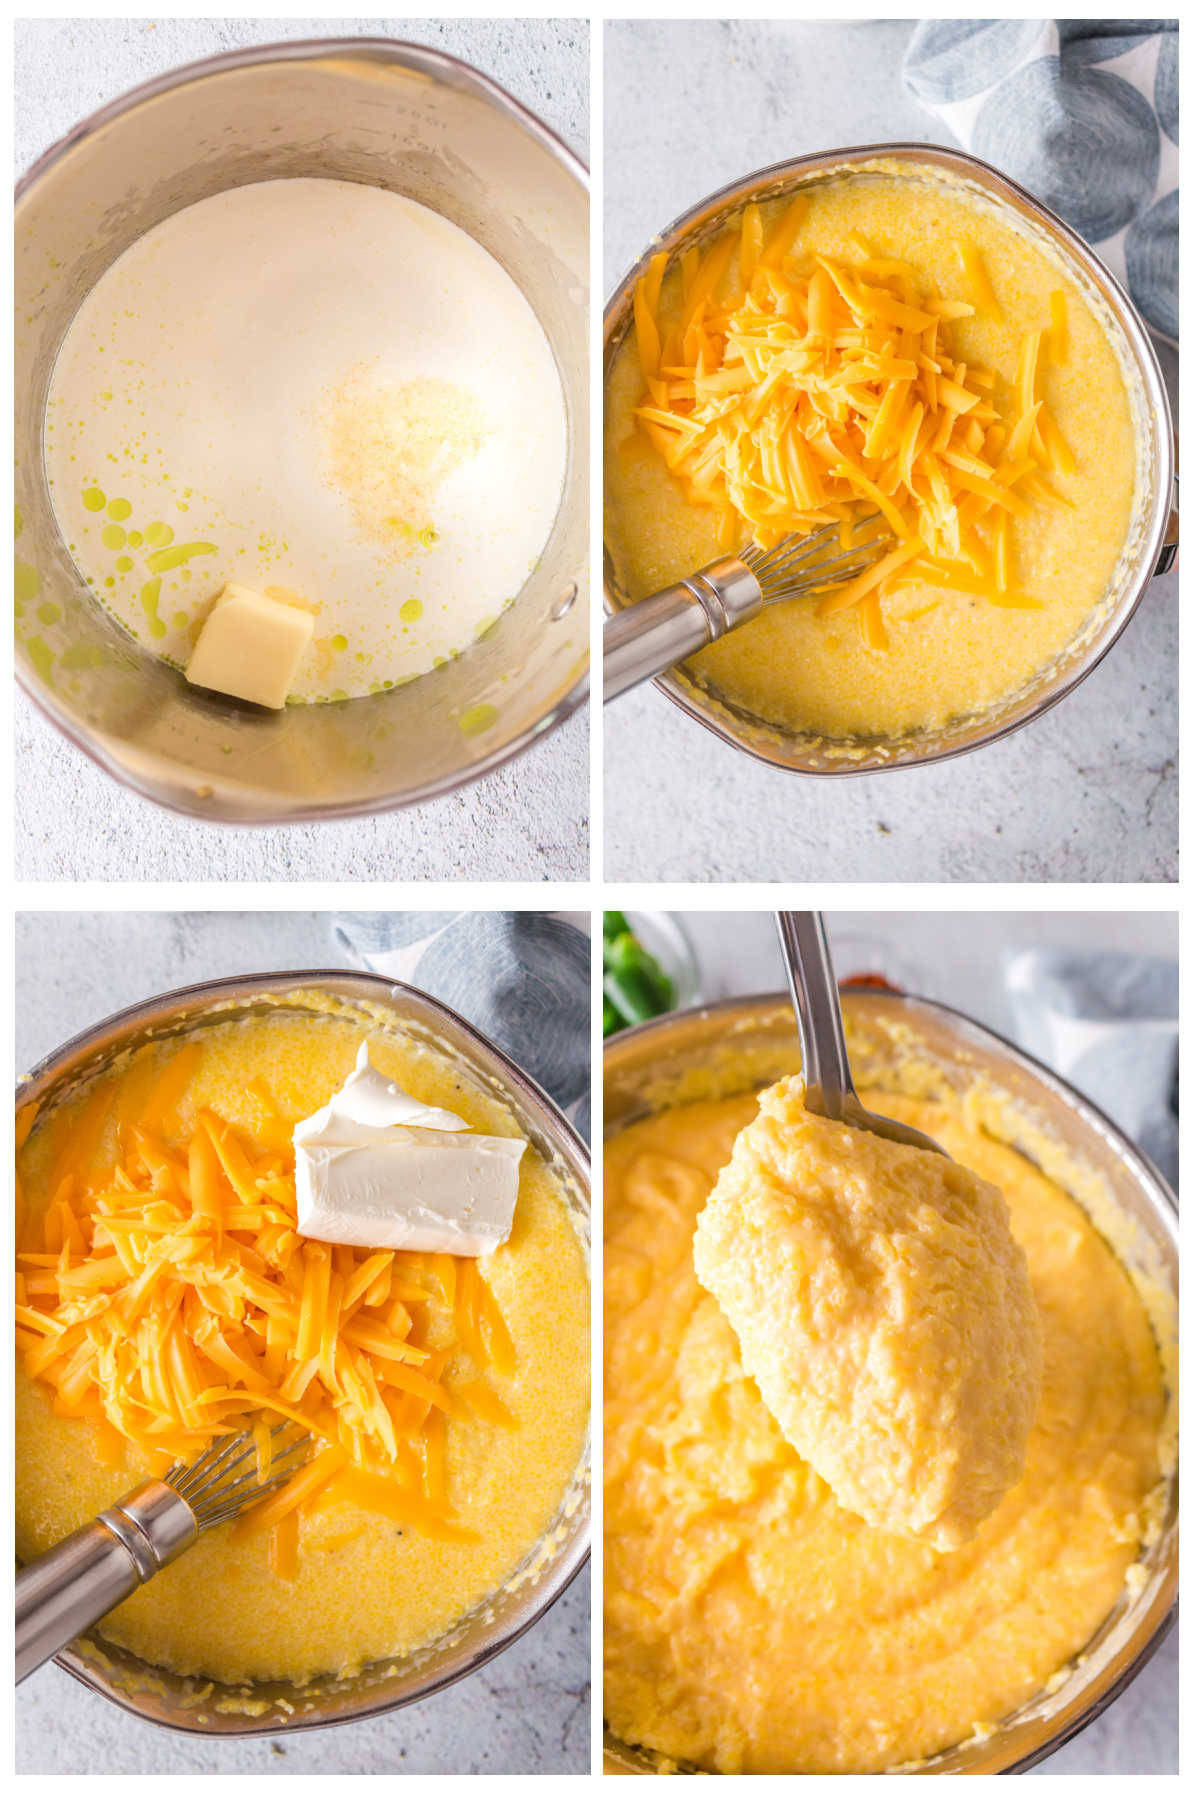 Step by step images showing how to make jalapeno cheese grits.